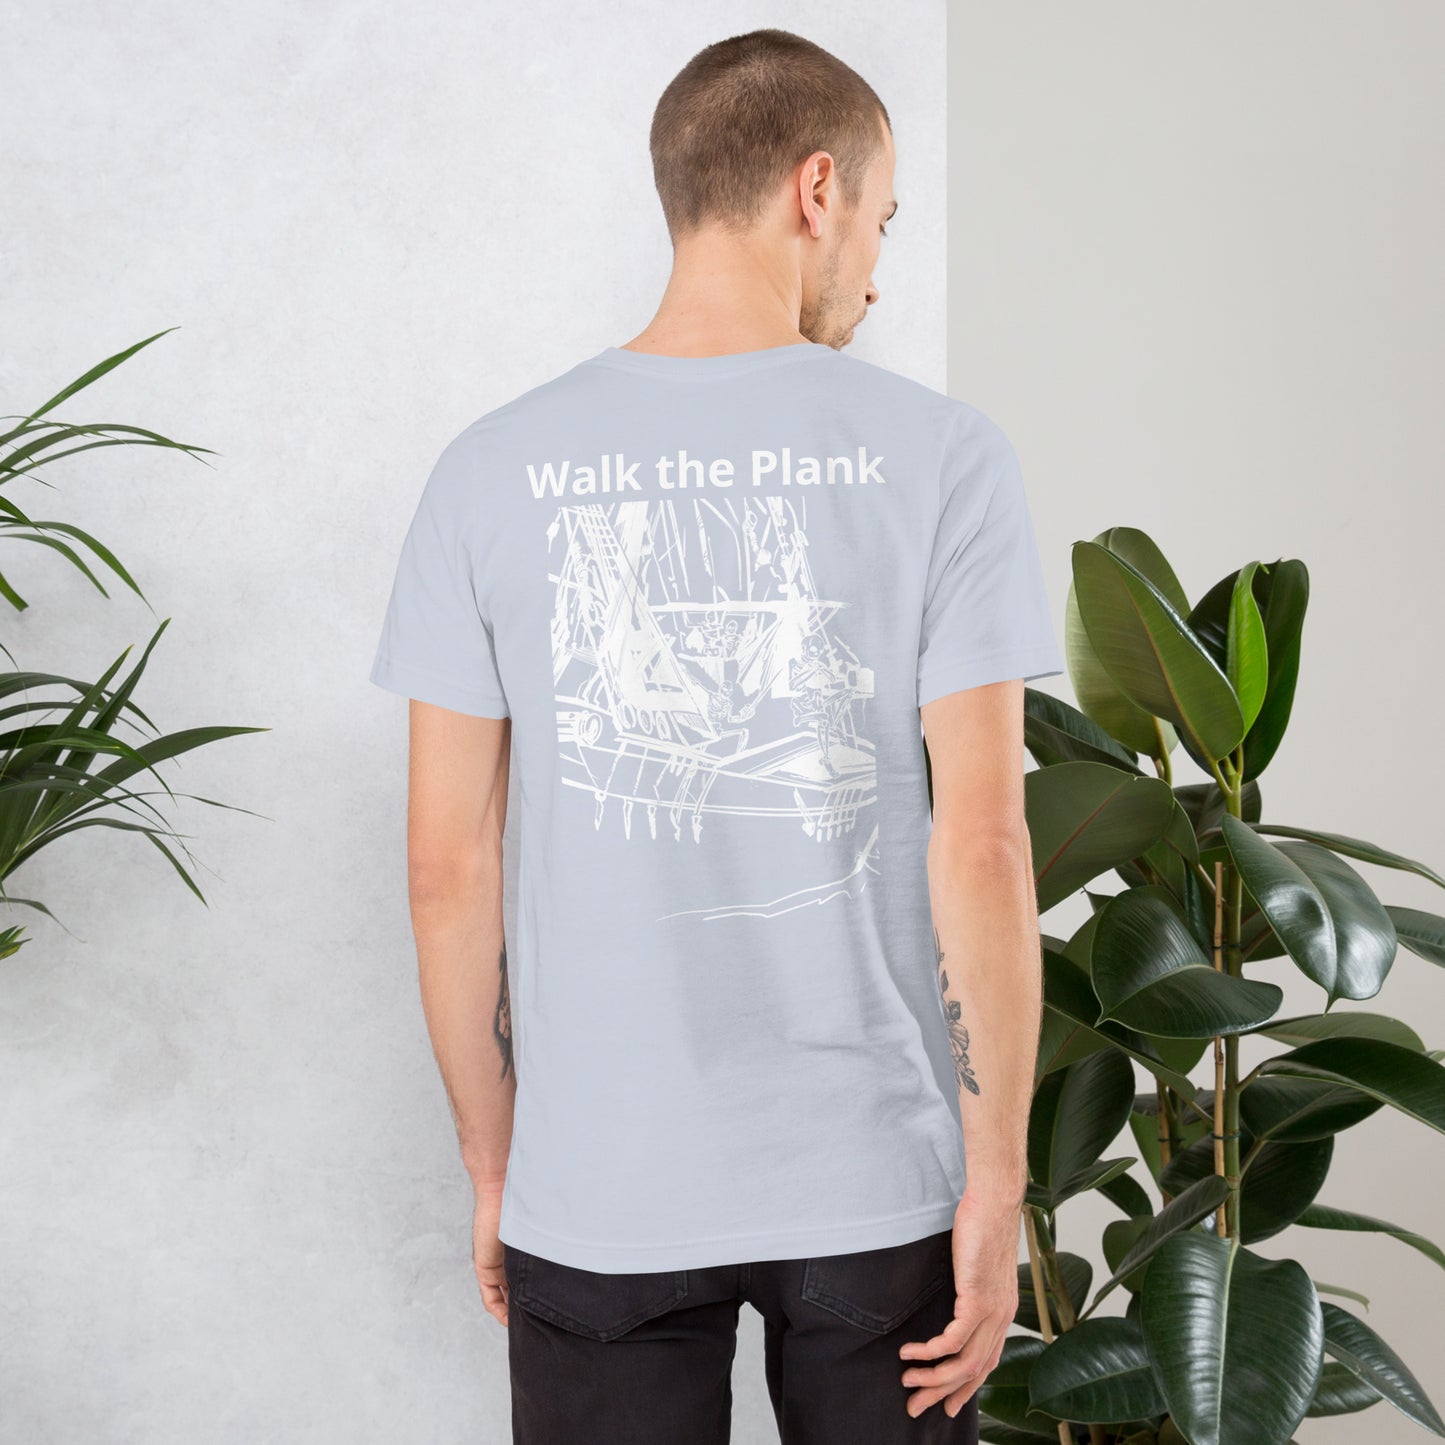 Walk the Plank funny pirate nautical ship themed T shirt